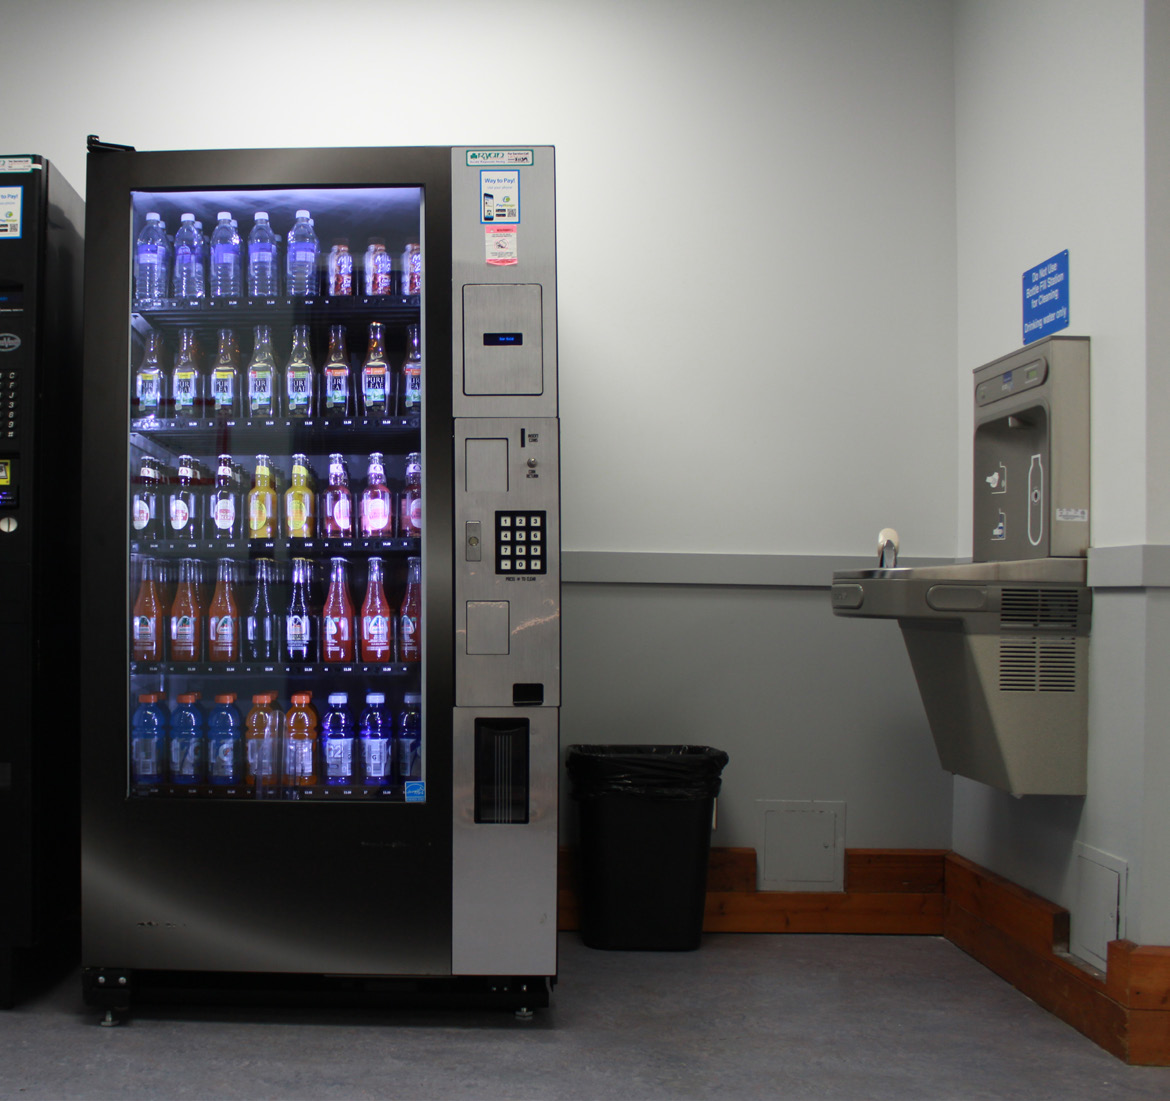 vending machine on the left with water fountain on the right.